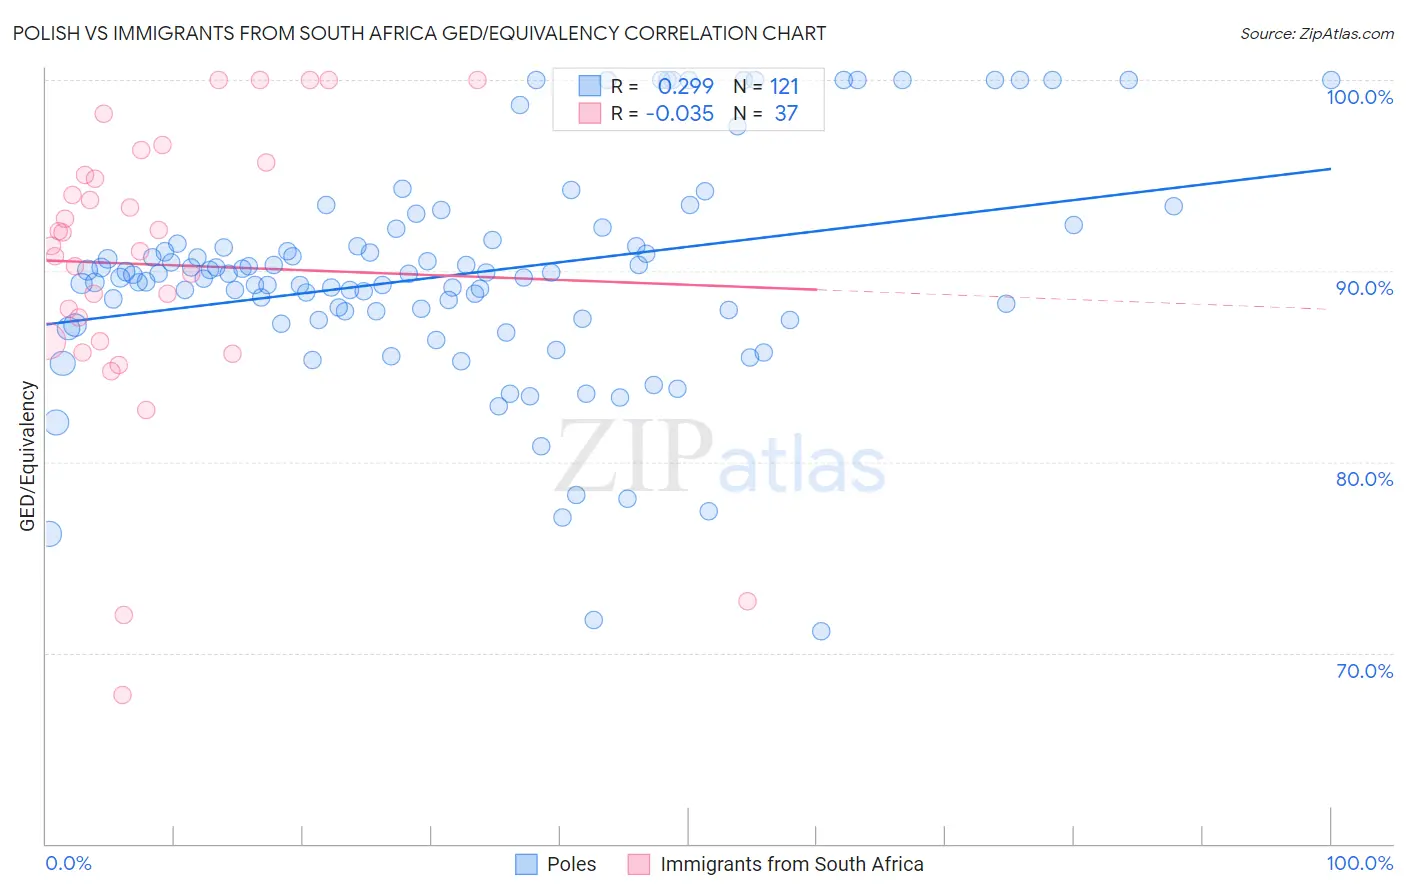 Polish vs Immigrants from South Africa GED/Equivalency